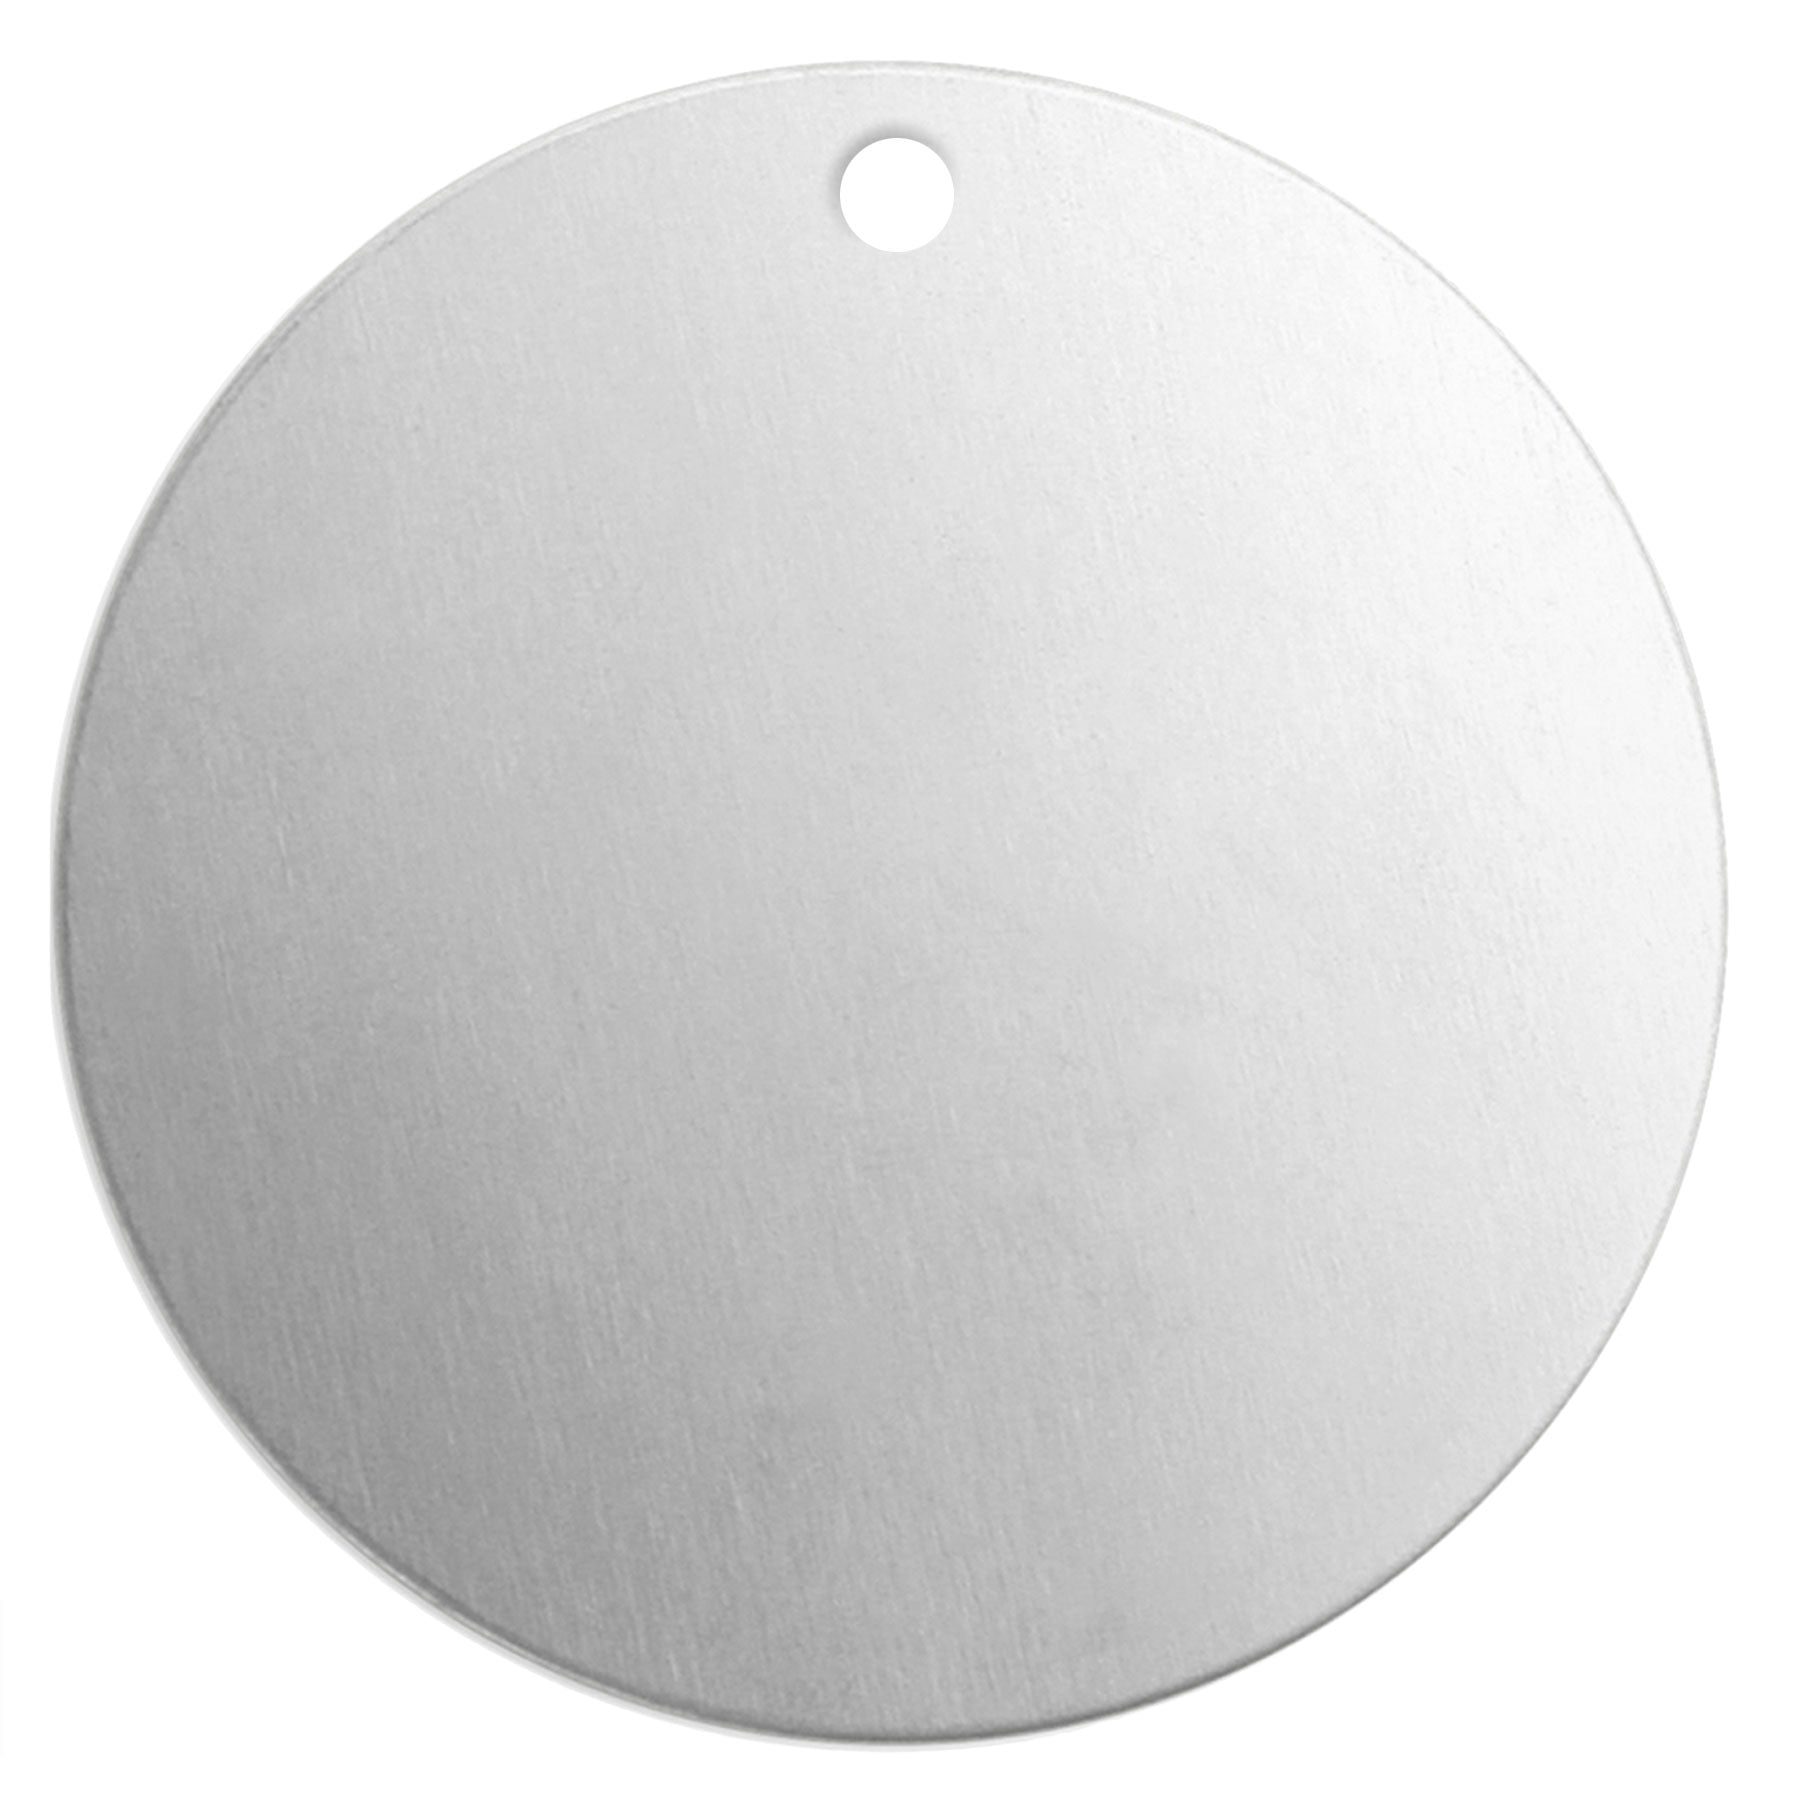 Blank 40mm Hammered Pattern 20G Metal Disc with Hole, Enameling